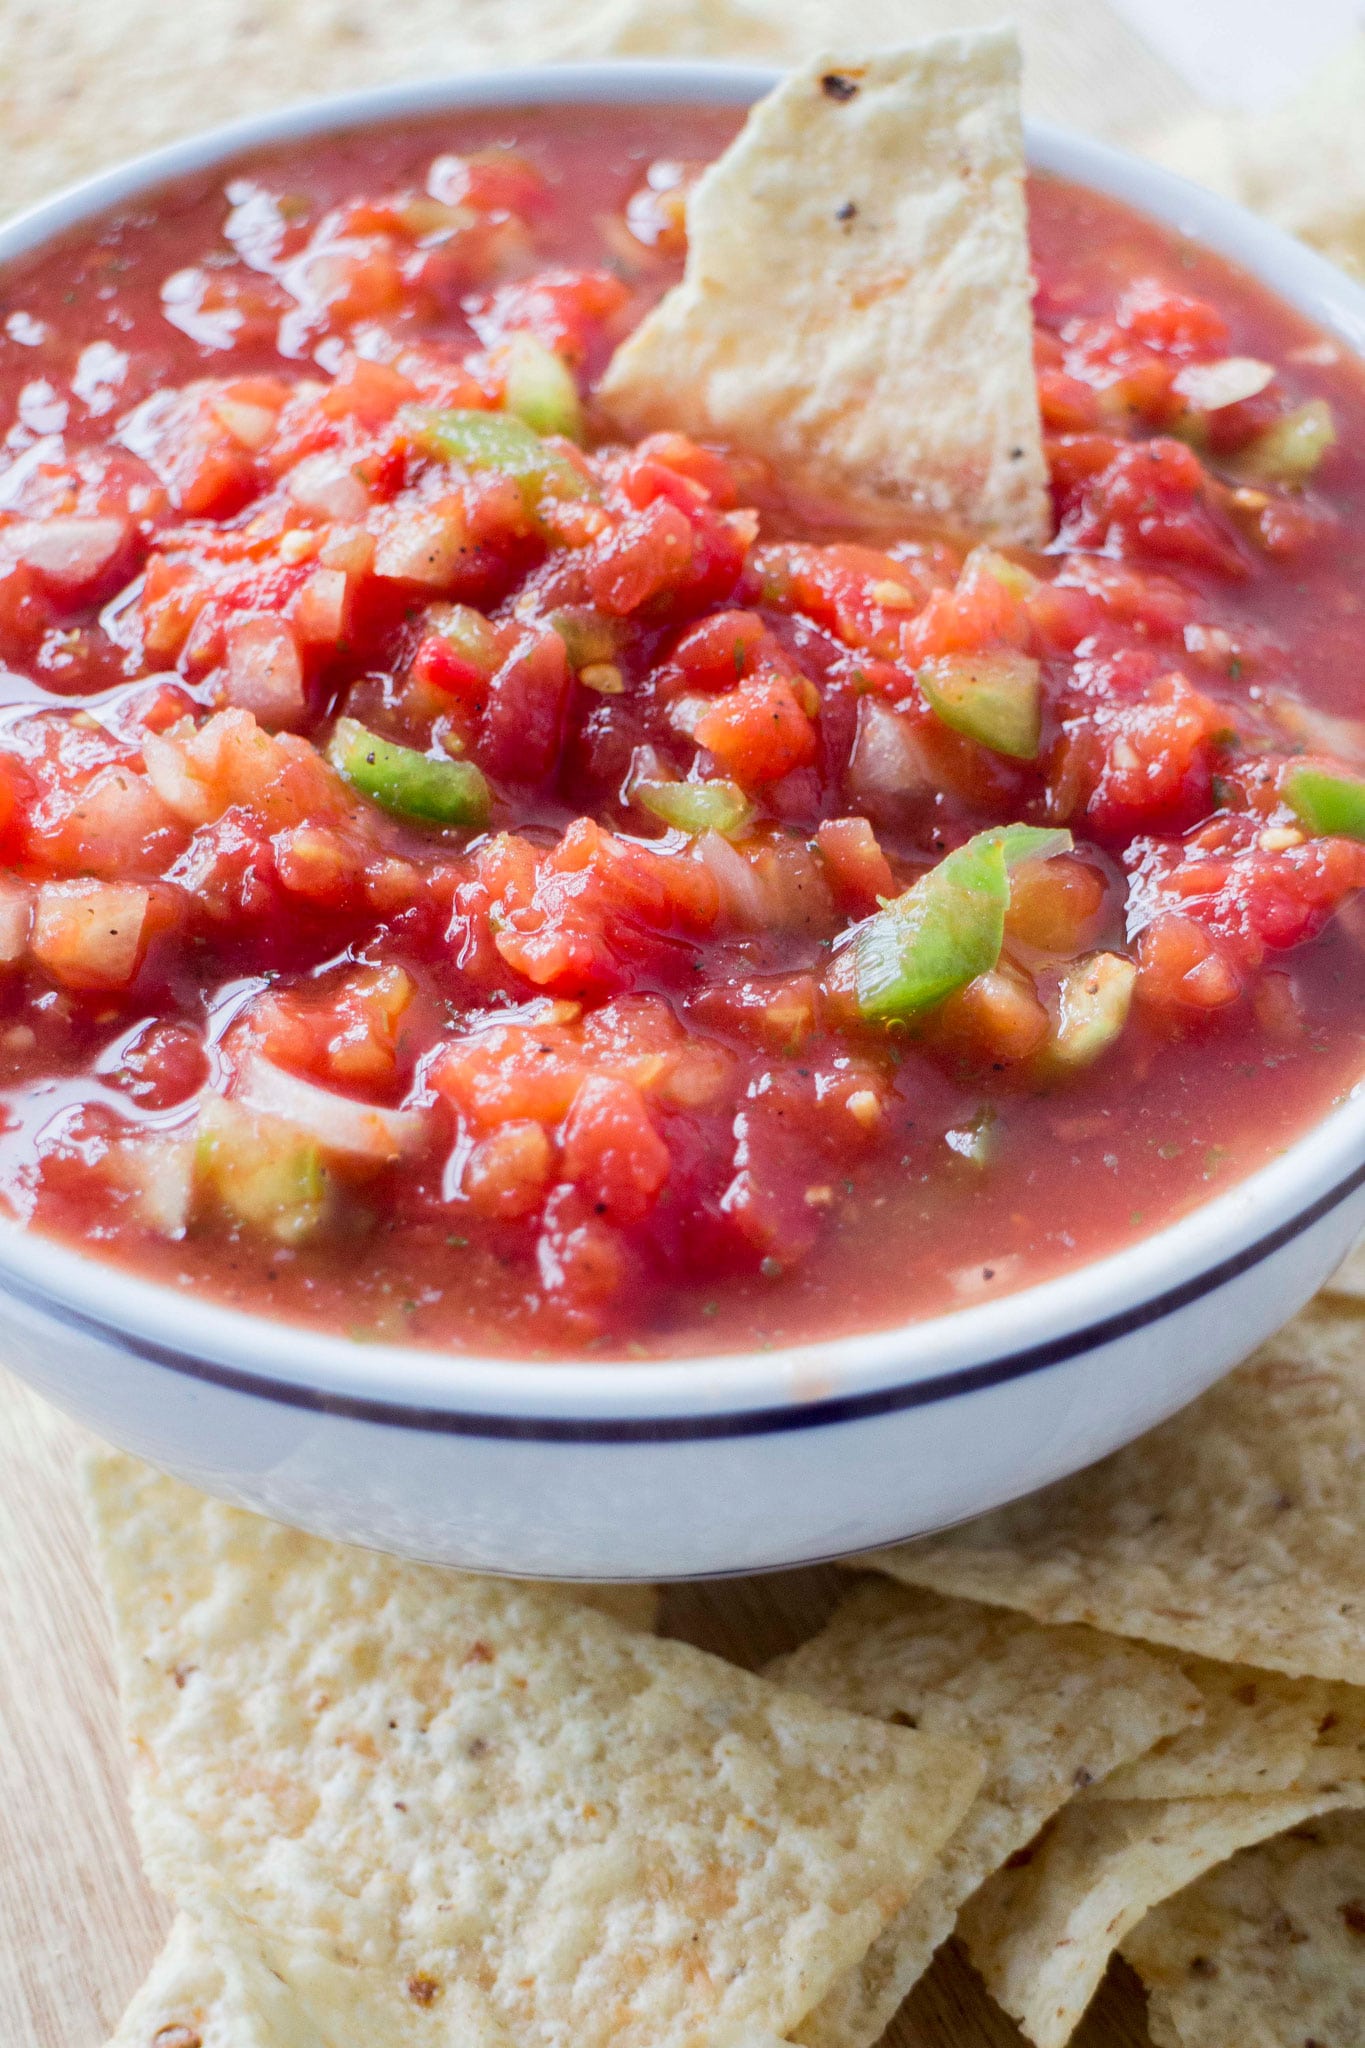 Canned Salsa Easy Recipe Made With Canned Tomatoes,Best Emergency Food Supply Company